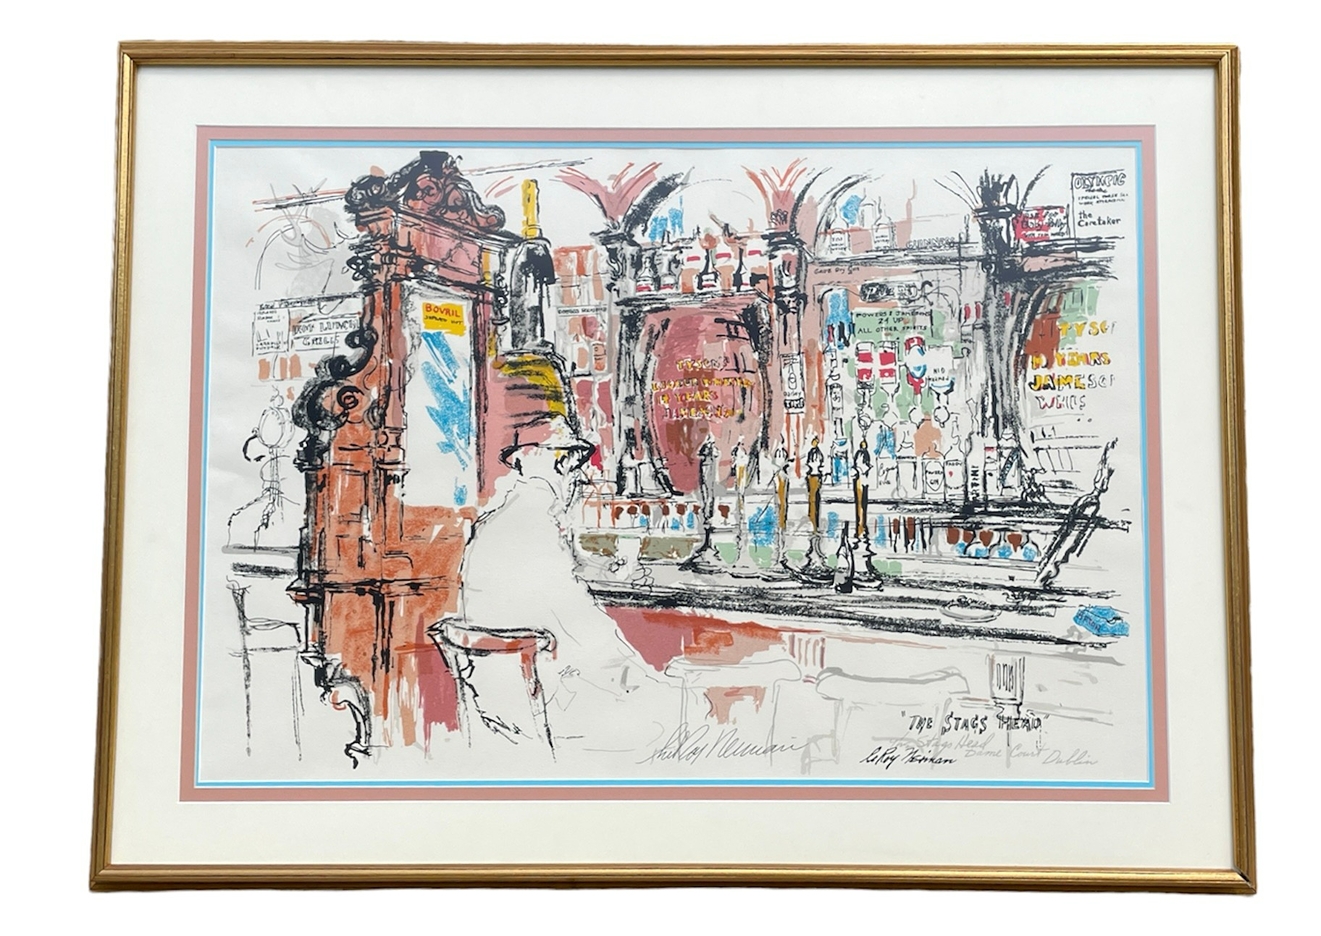 Artwork by LeRoy Neiman, Signed LEROY NEIMAN "Dublin Bar- The Stag's Head" Serigraph, Made of Serigraph